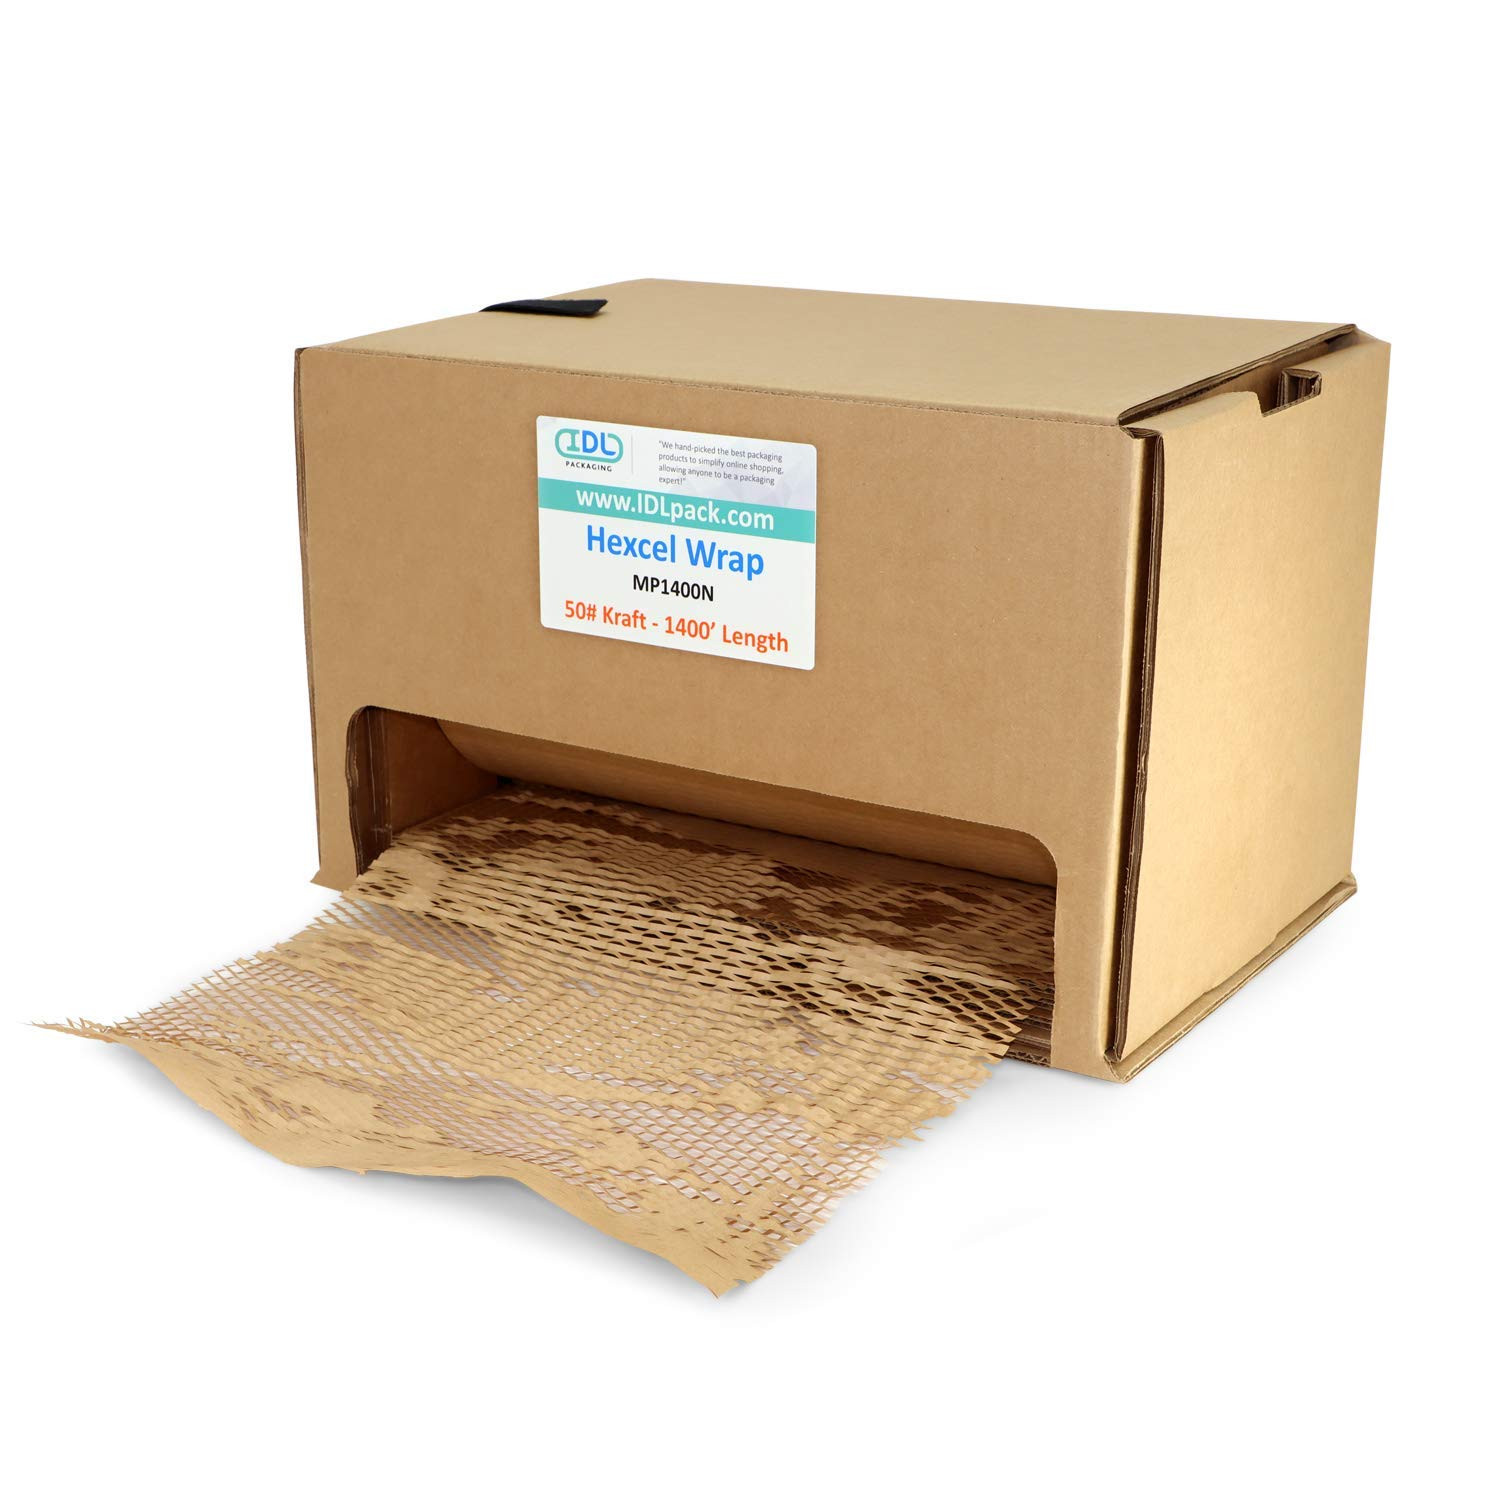 China Honeycomb Packing Paper in Self-Dispensed Box Manufacturer and  Supplier